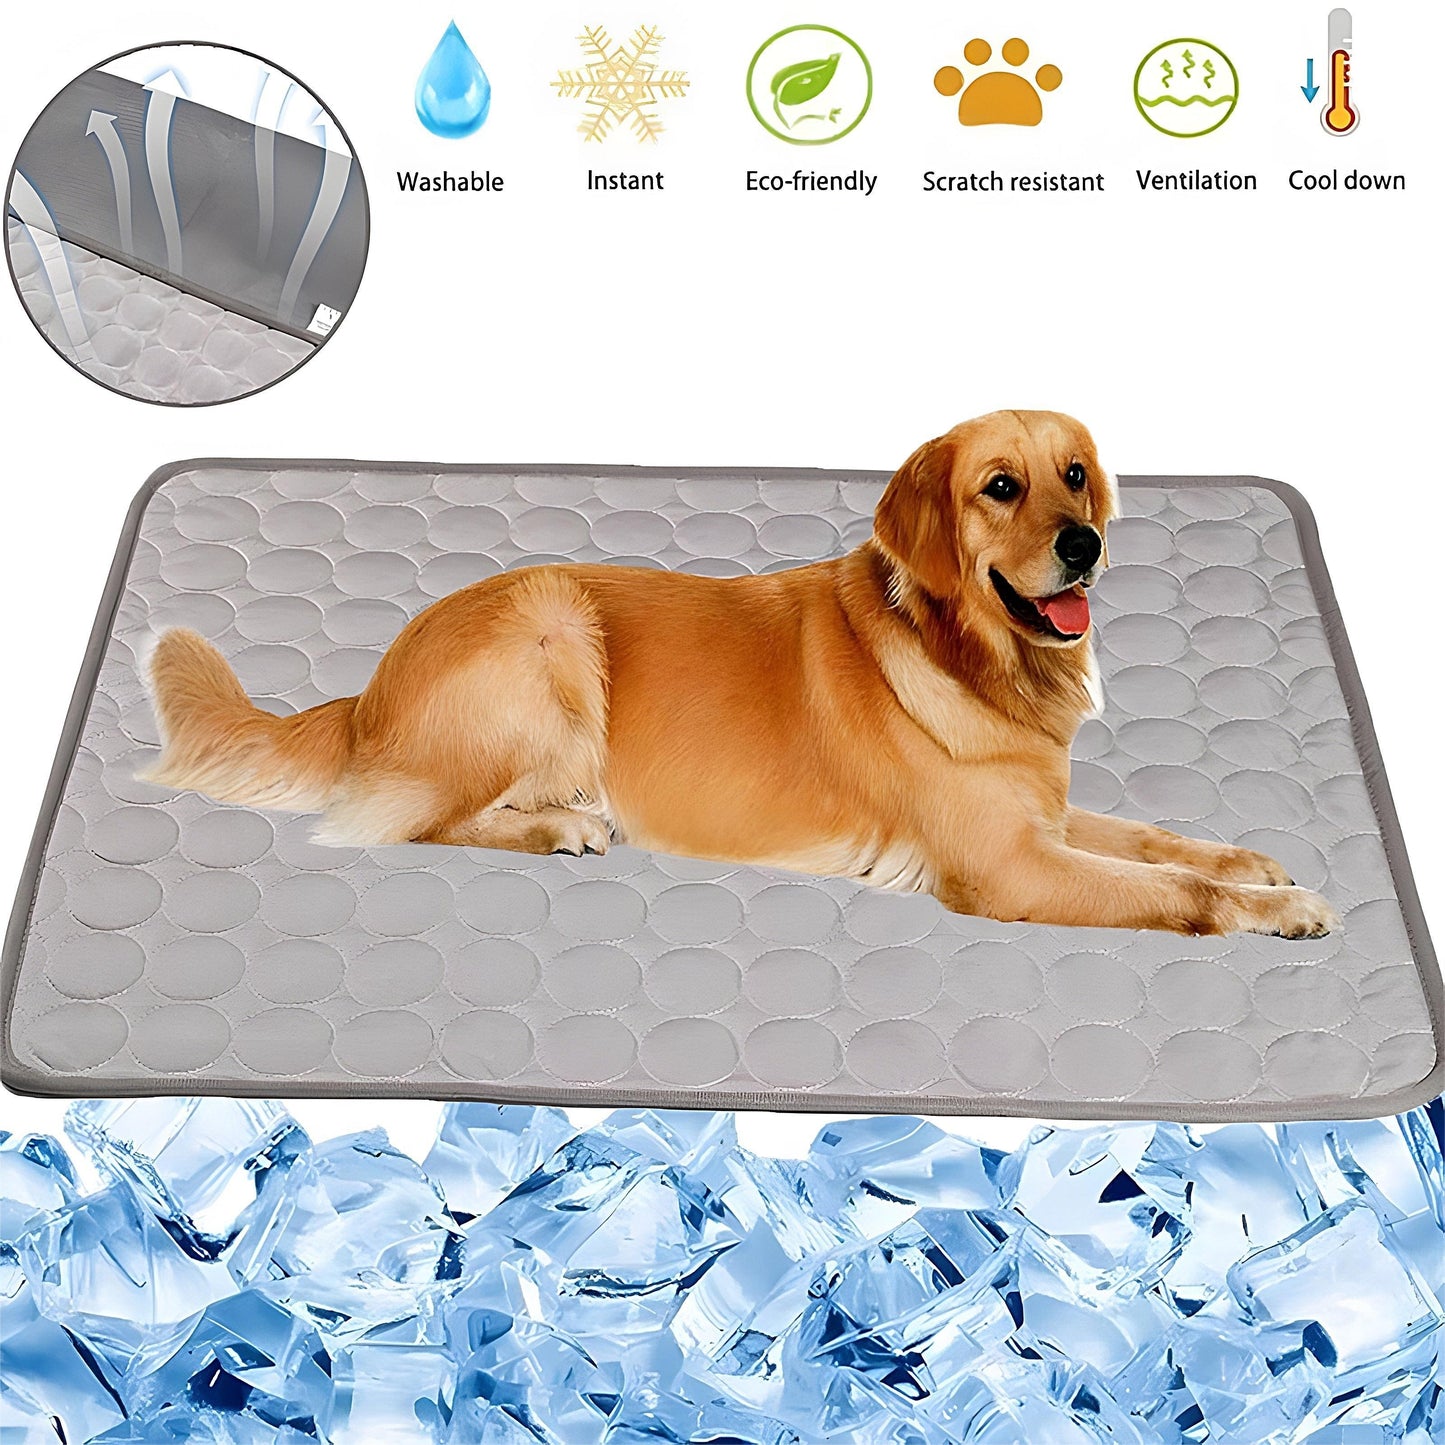 The Cooling Mat™